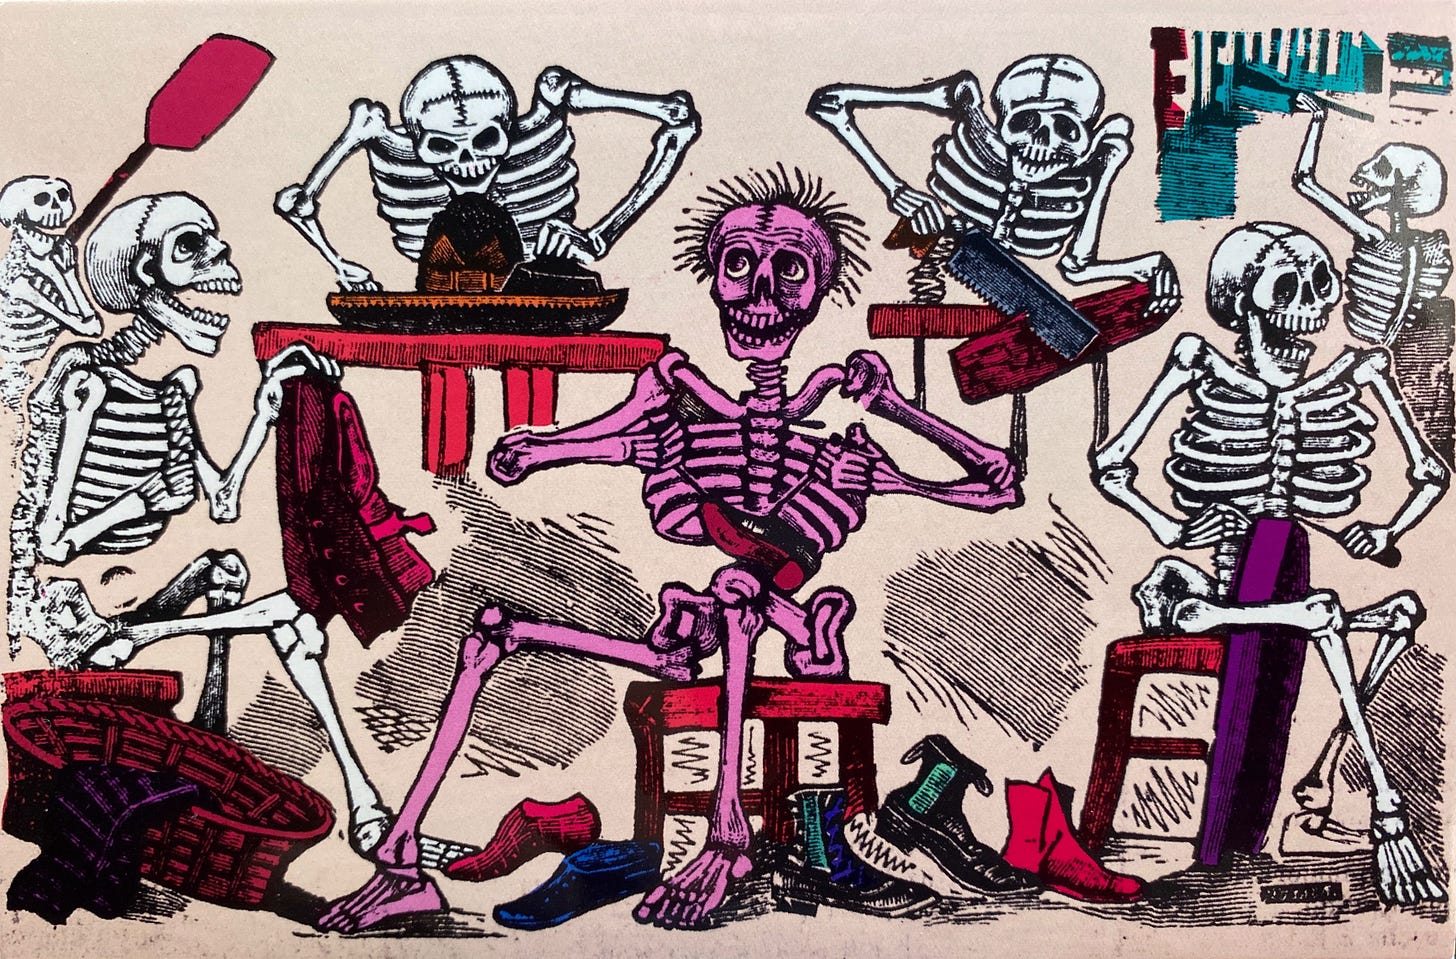 A group of naked skeletons crafting shoes, hats and other forms of clothing in their shop.